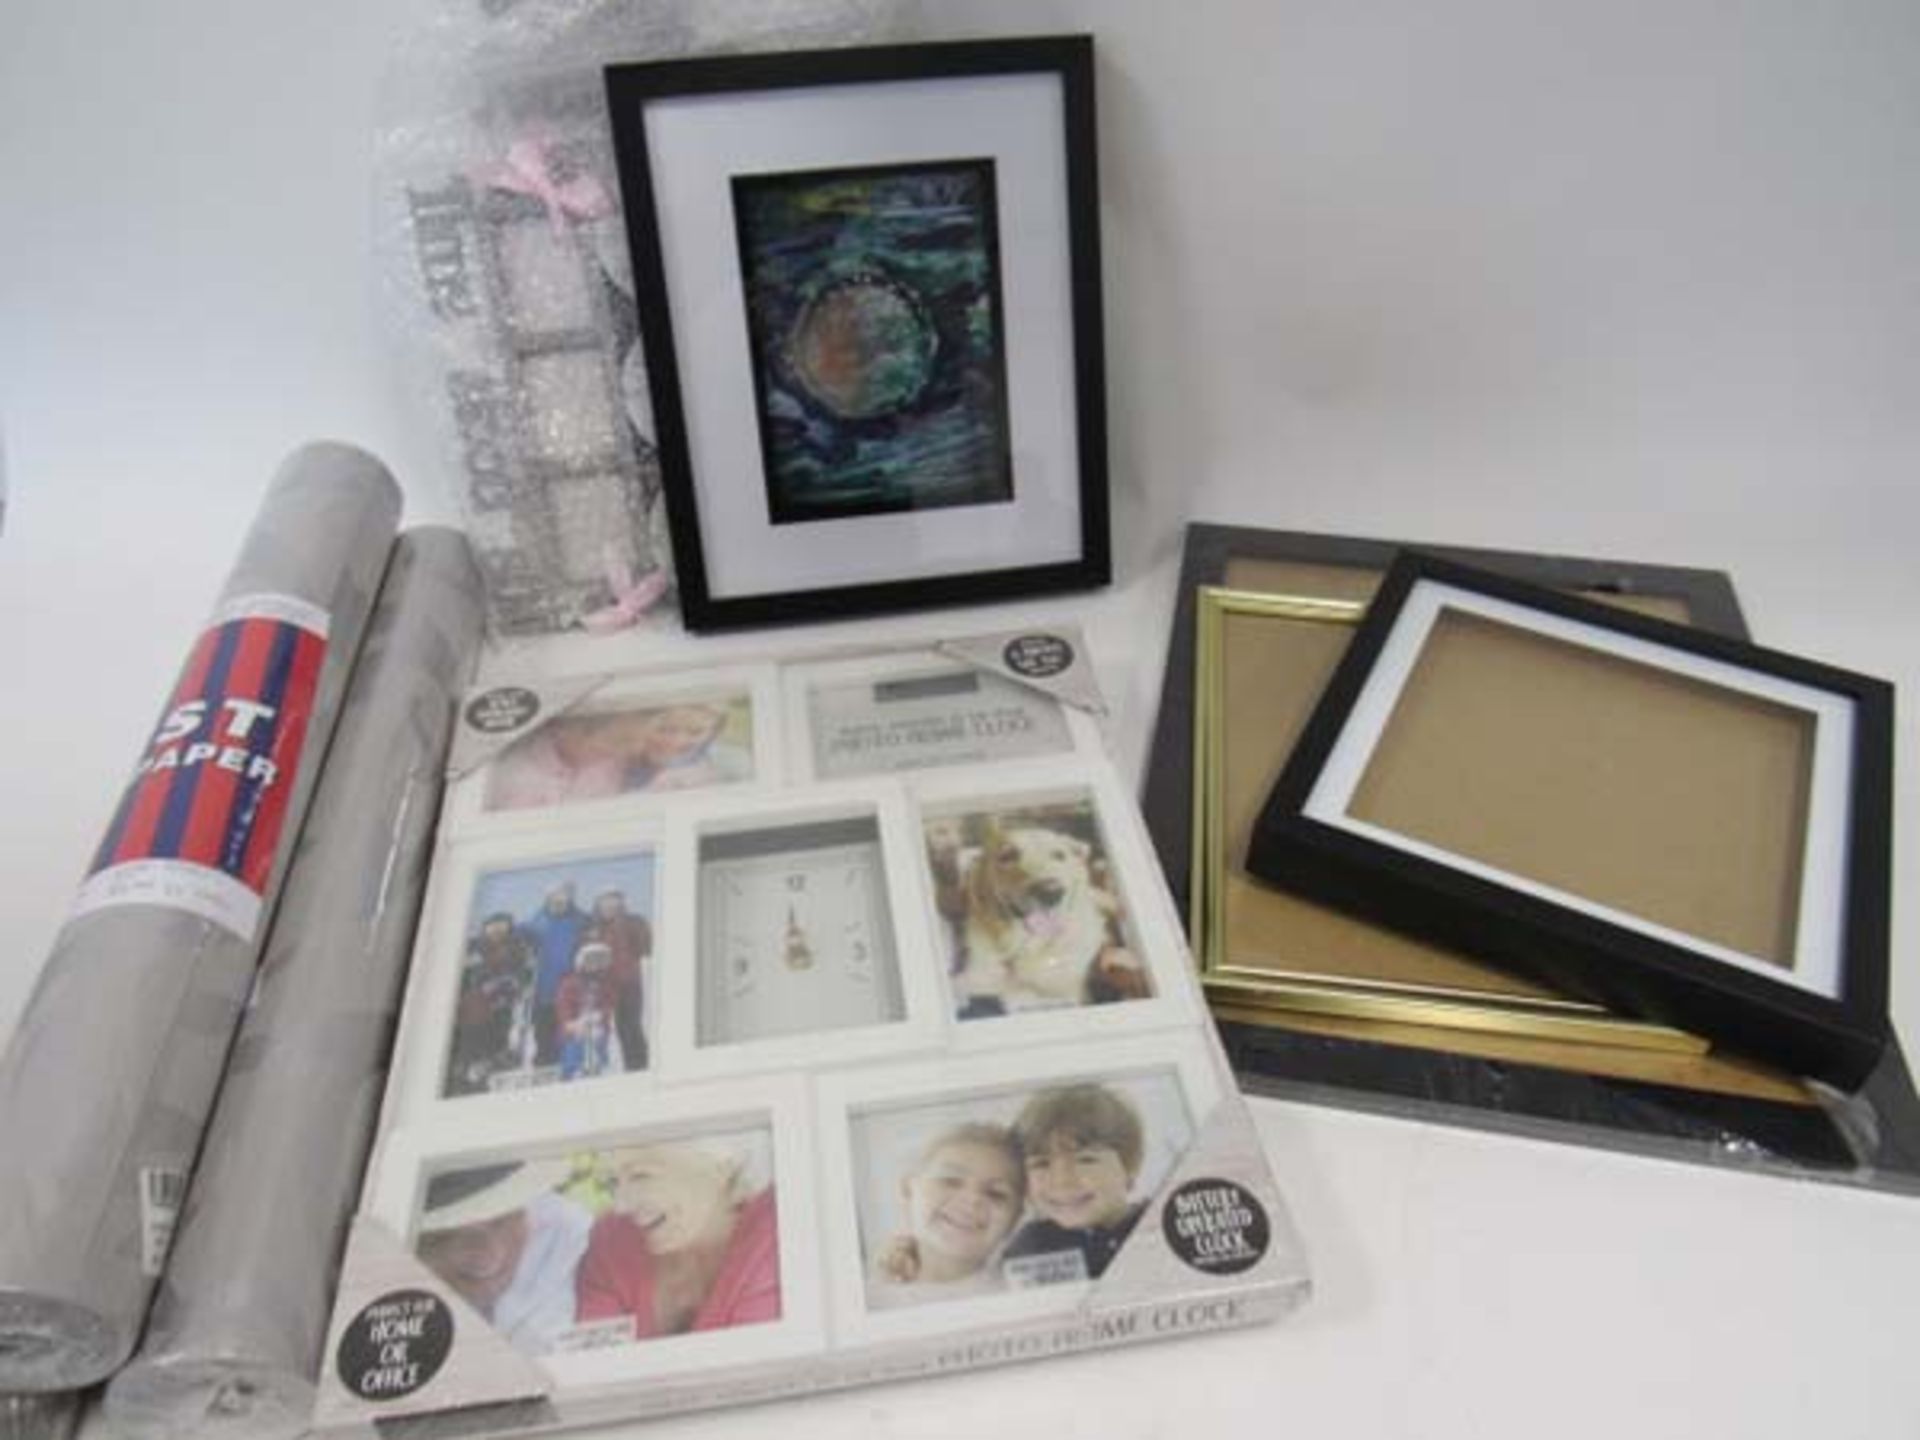 Quantity of various size frames, picture frame wall clock, and 3 rolls of grey patterned wallpaper